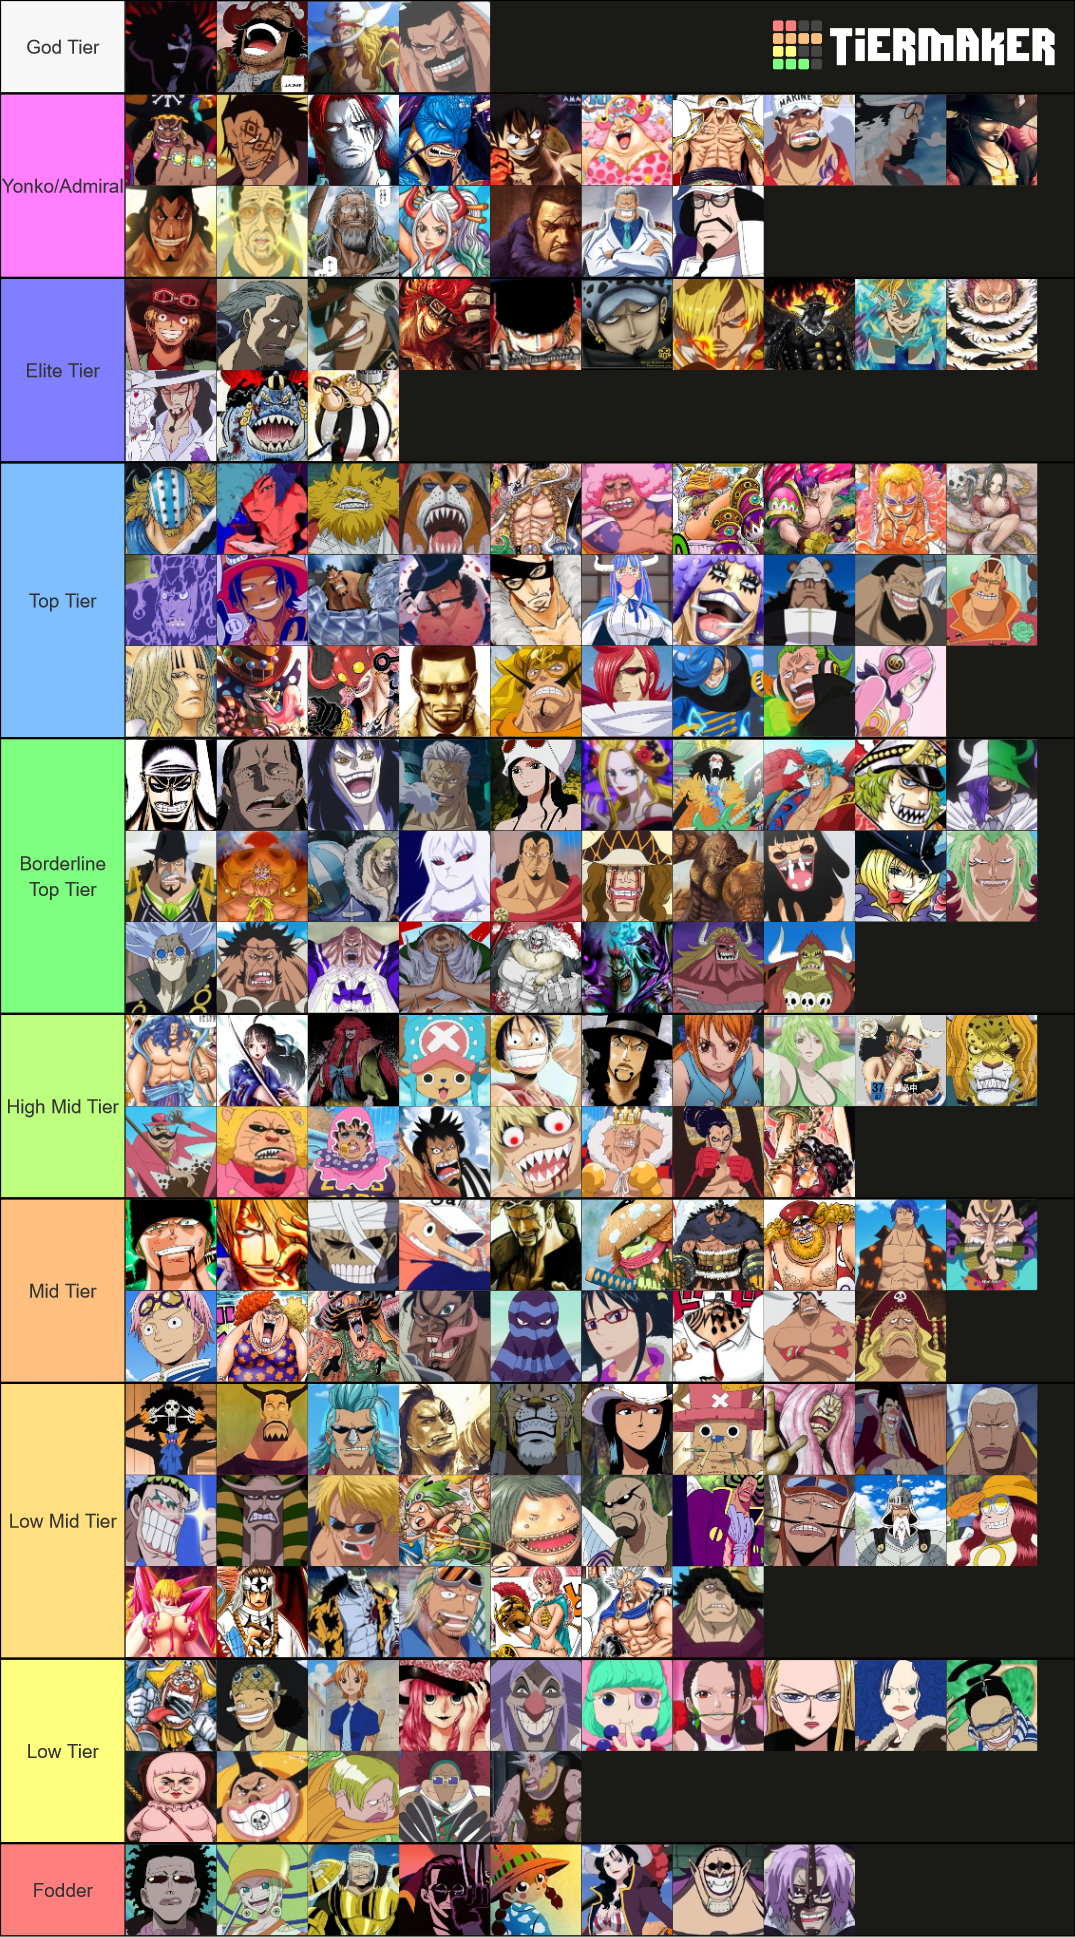 Anime Power Systems Tier List (Community Rankings) - TierMaker